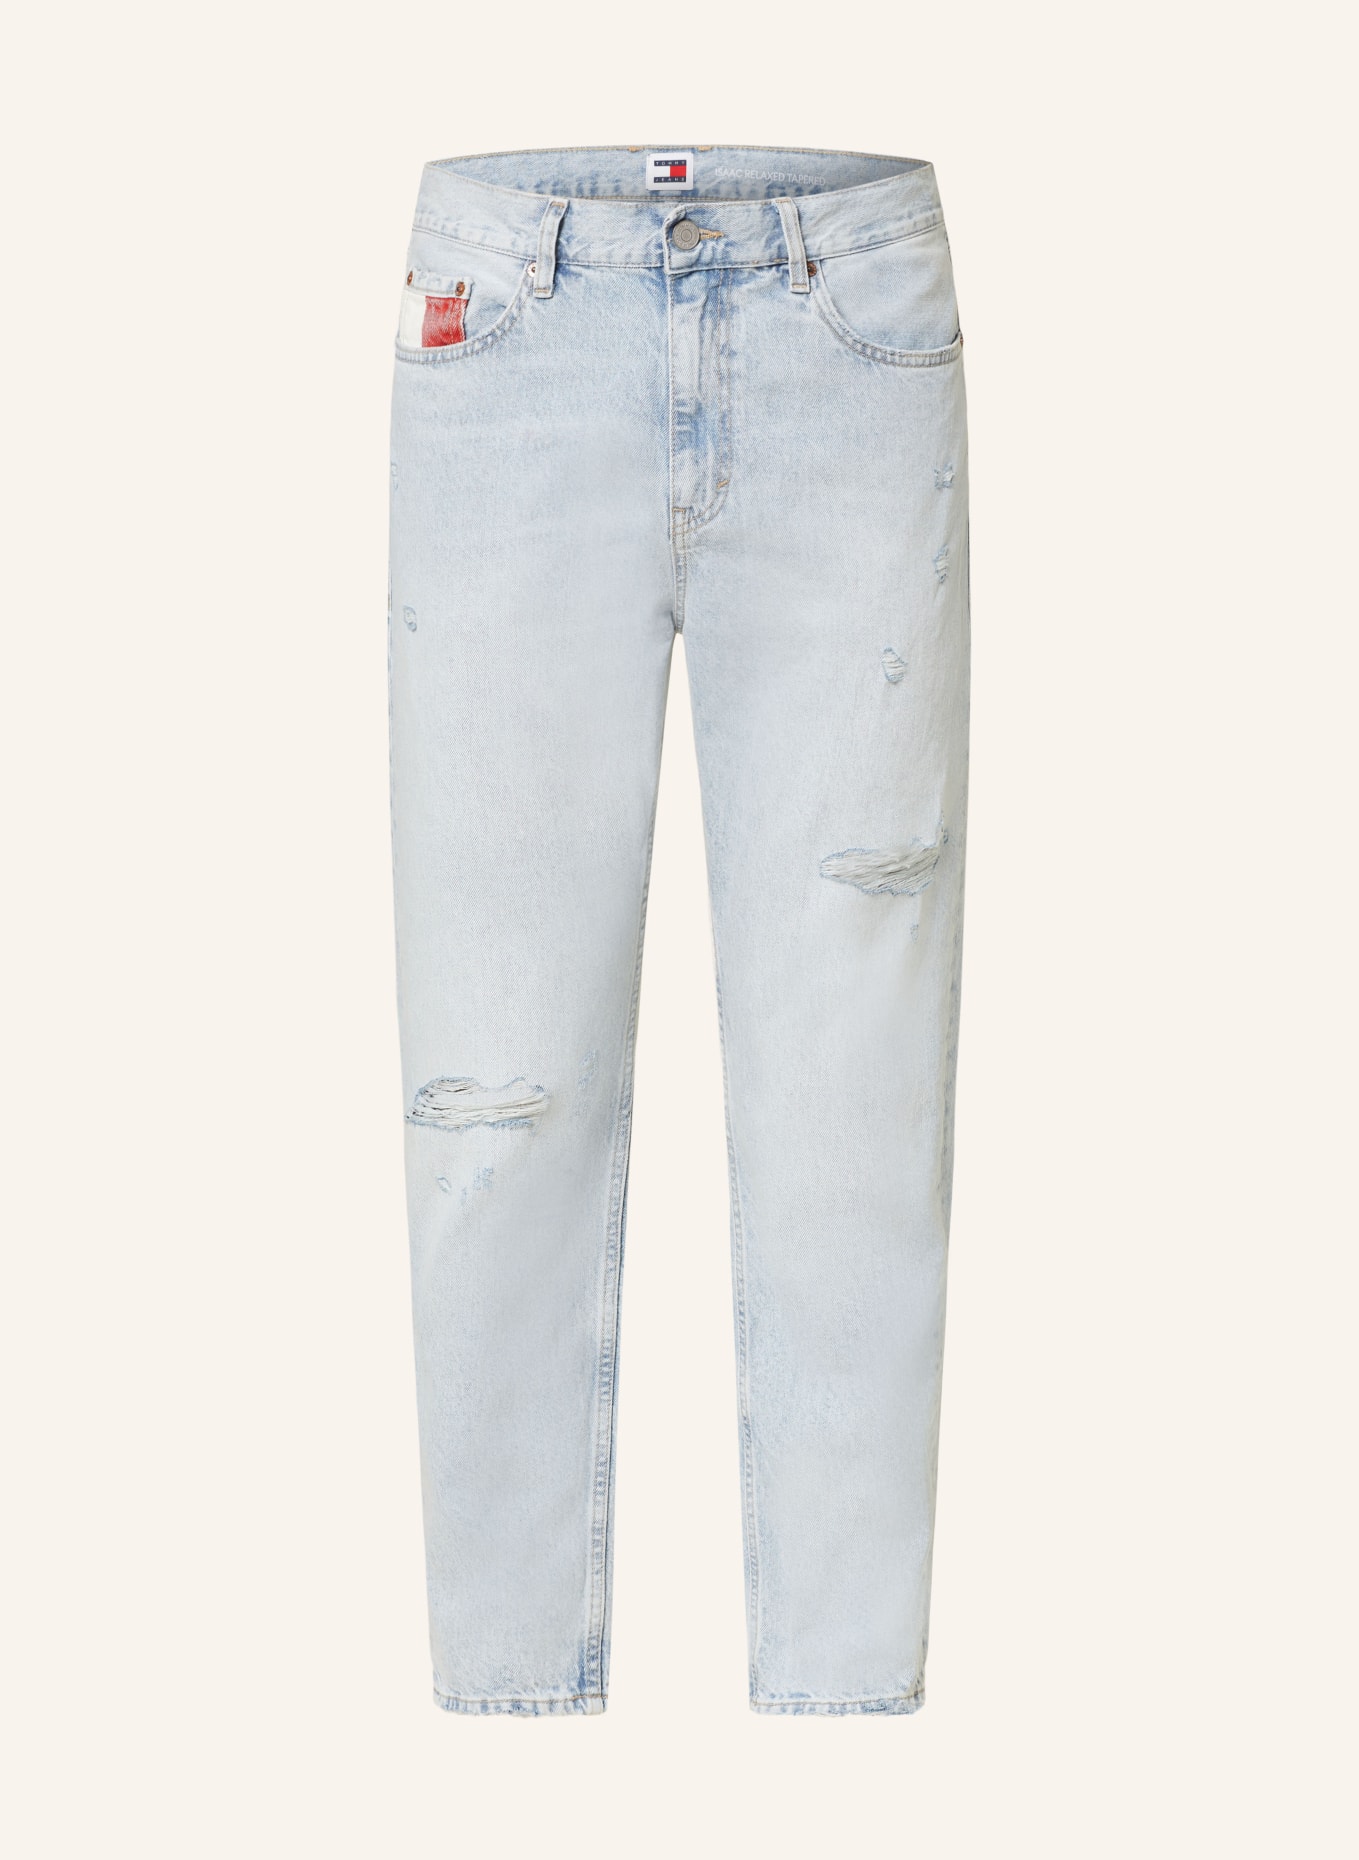 TOMMY JEANS Jeansy ISAAC relaxed taper fit, Kolor: 1AB Denim Light (Obrazek 1)